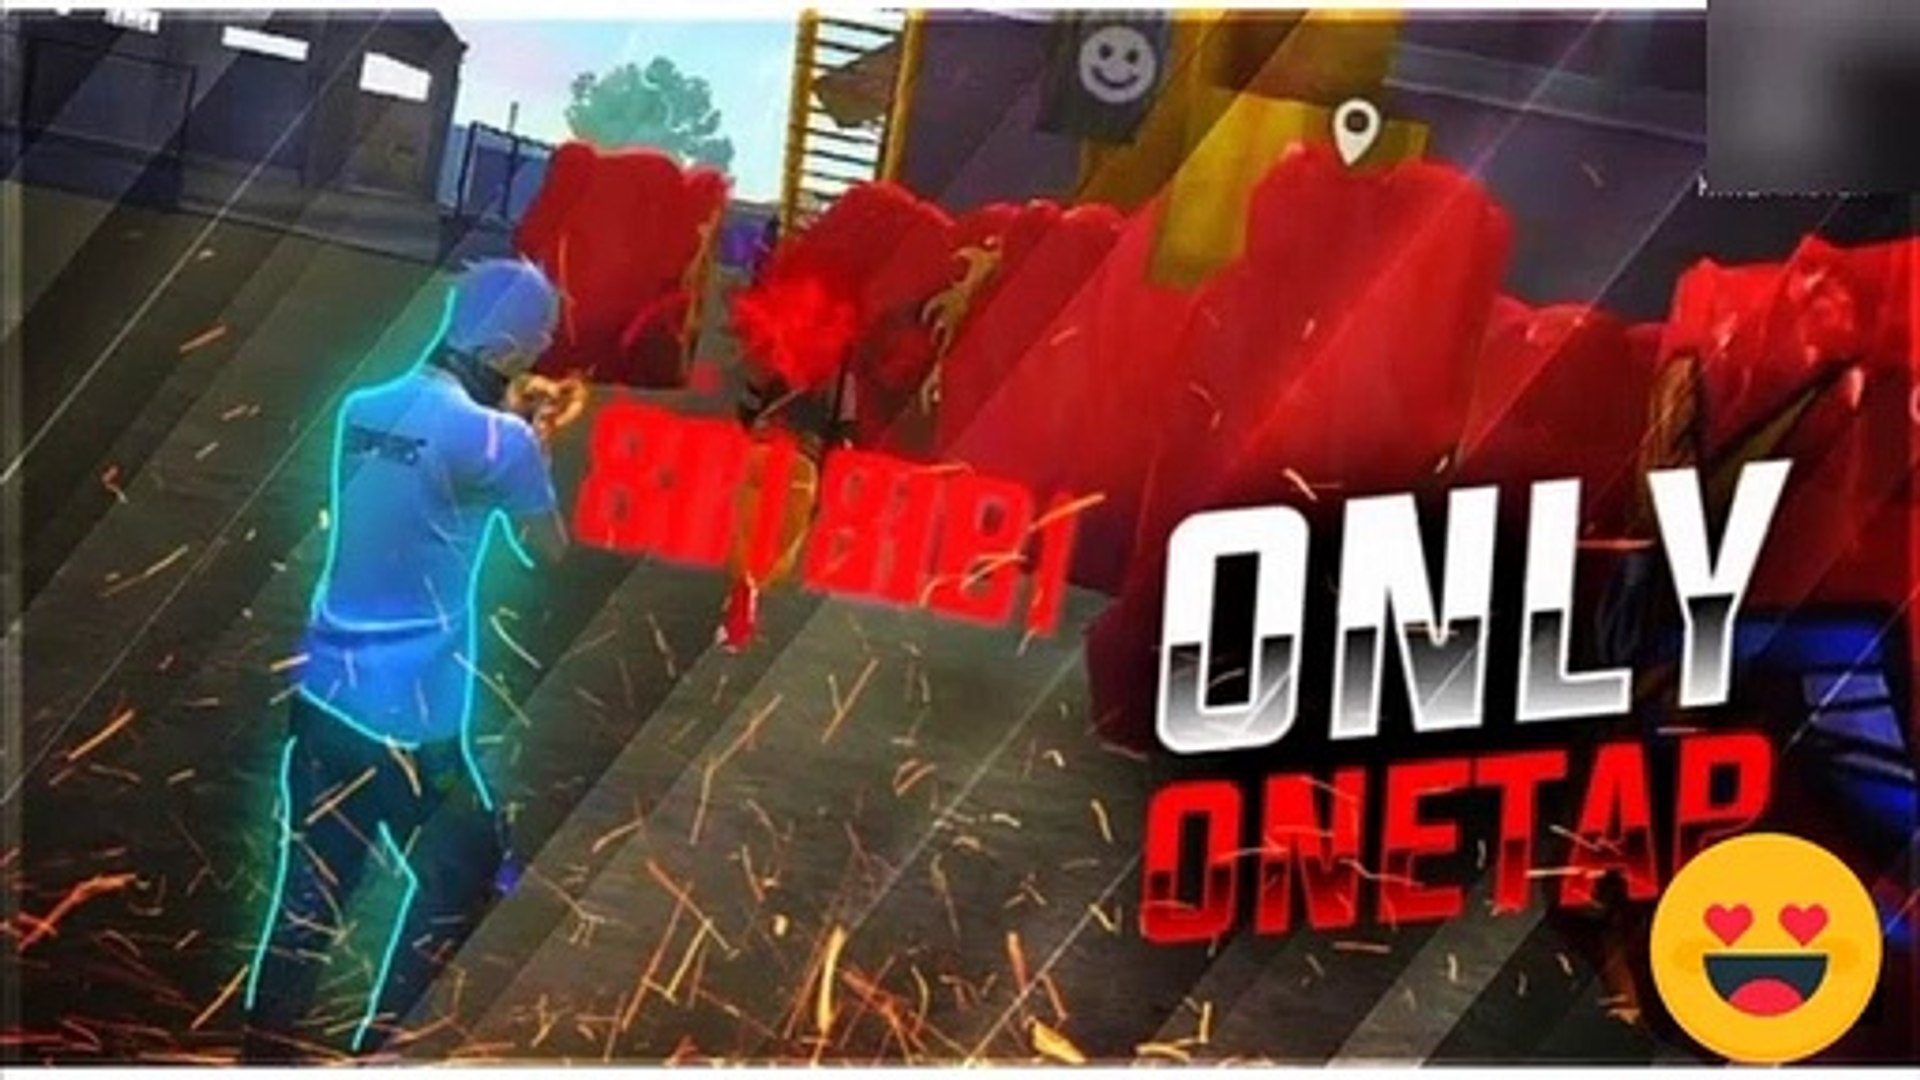 Ff thumbnail #freefire thumbnail#thumbnail#thumbnail for ff